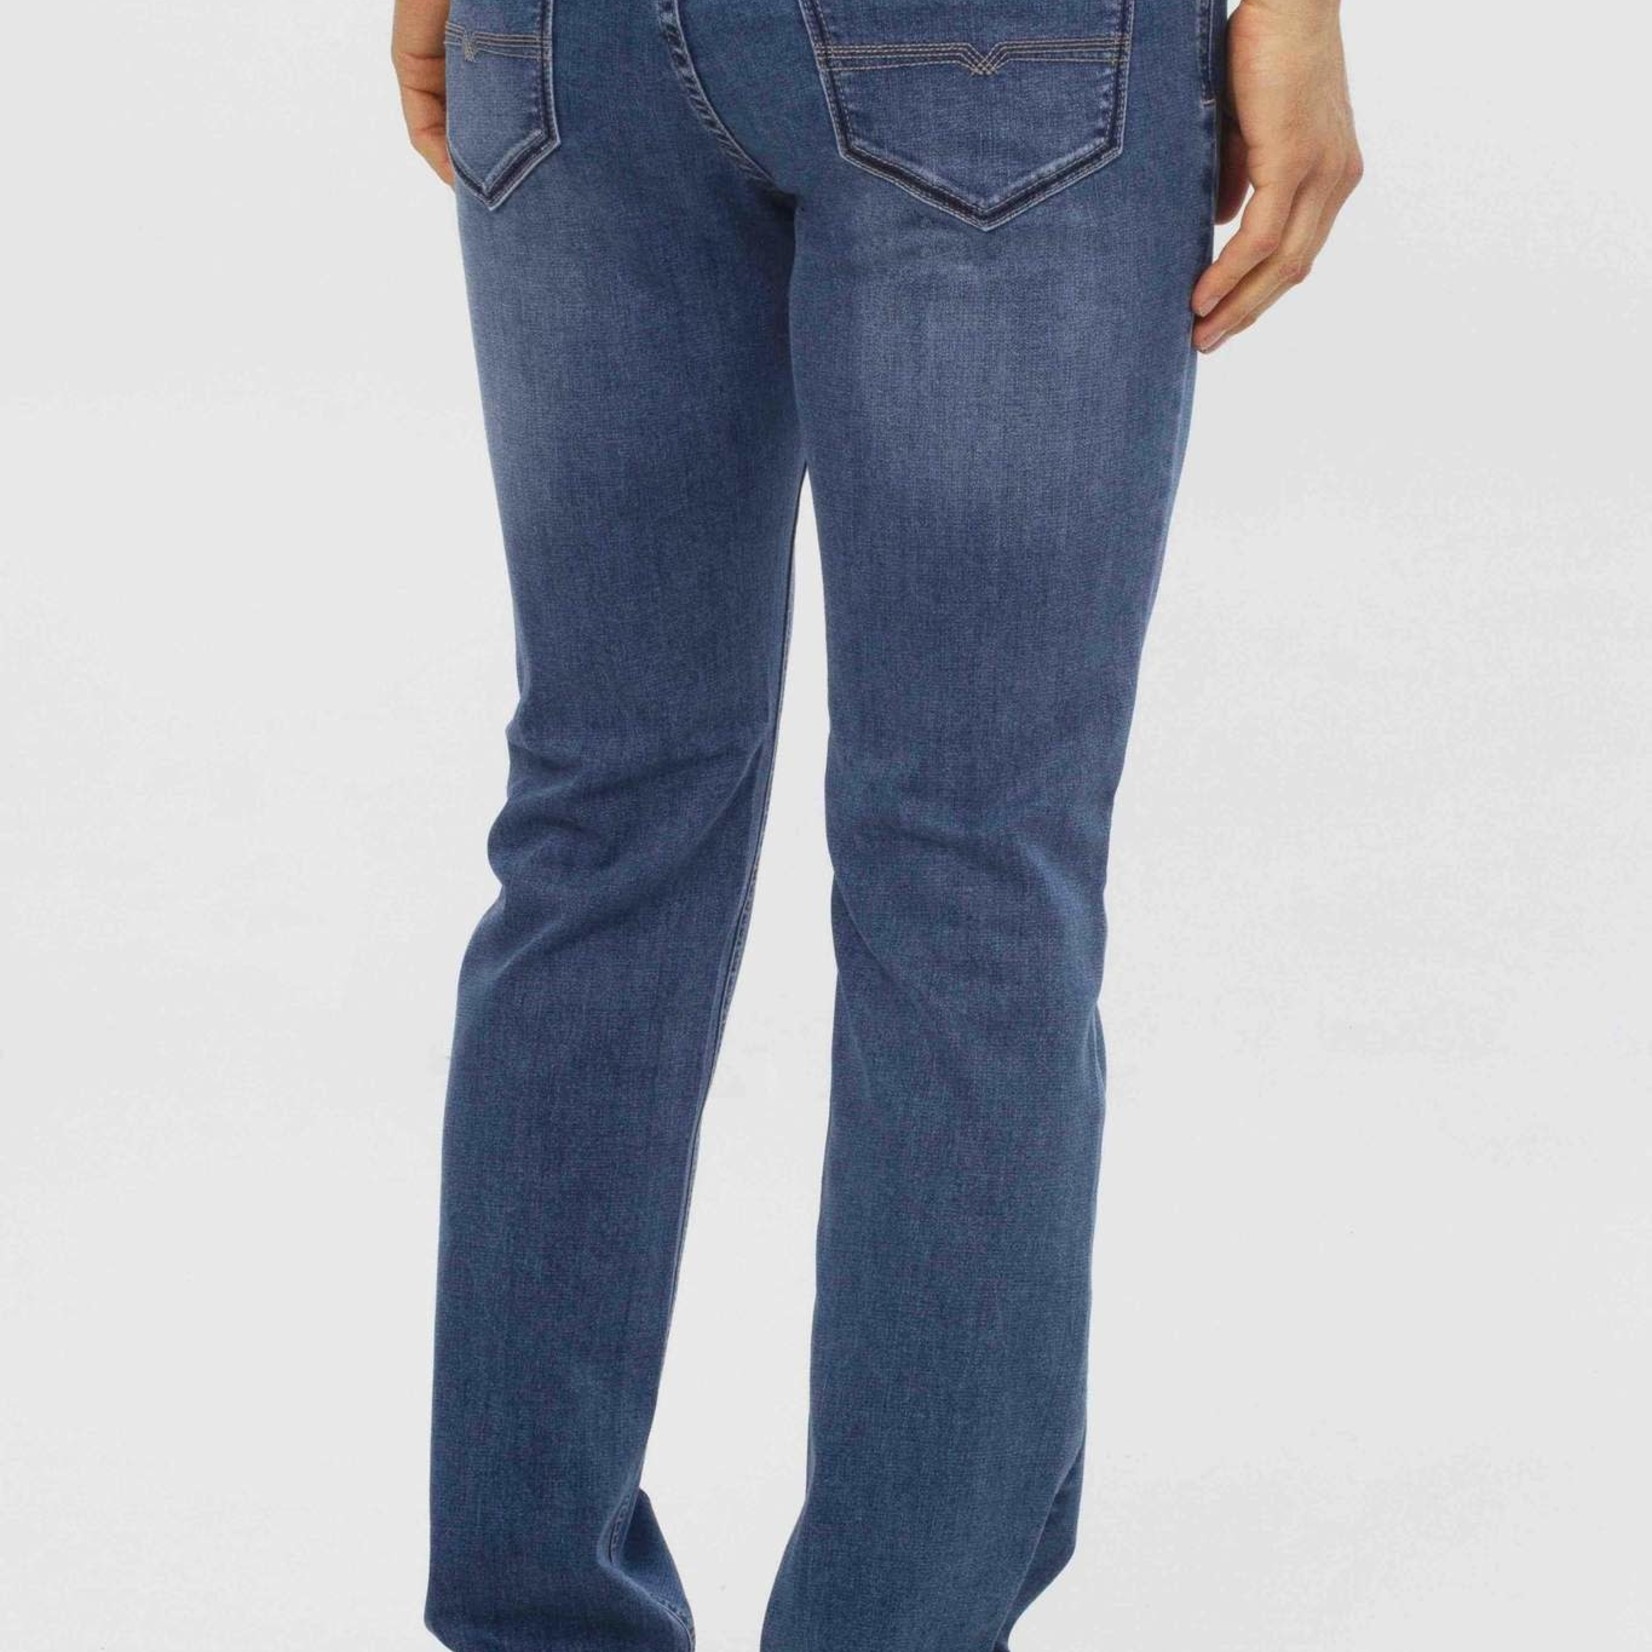 Lois Jeans Canada The "Brad Slim 6866" by Lois Jeans